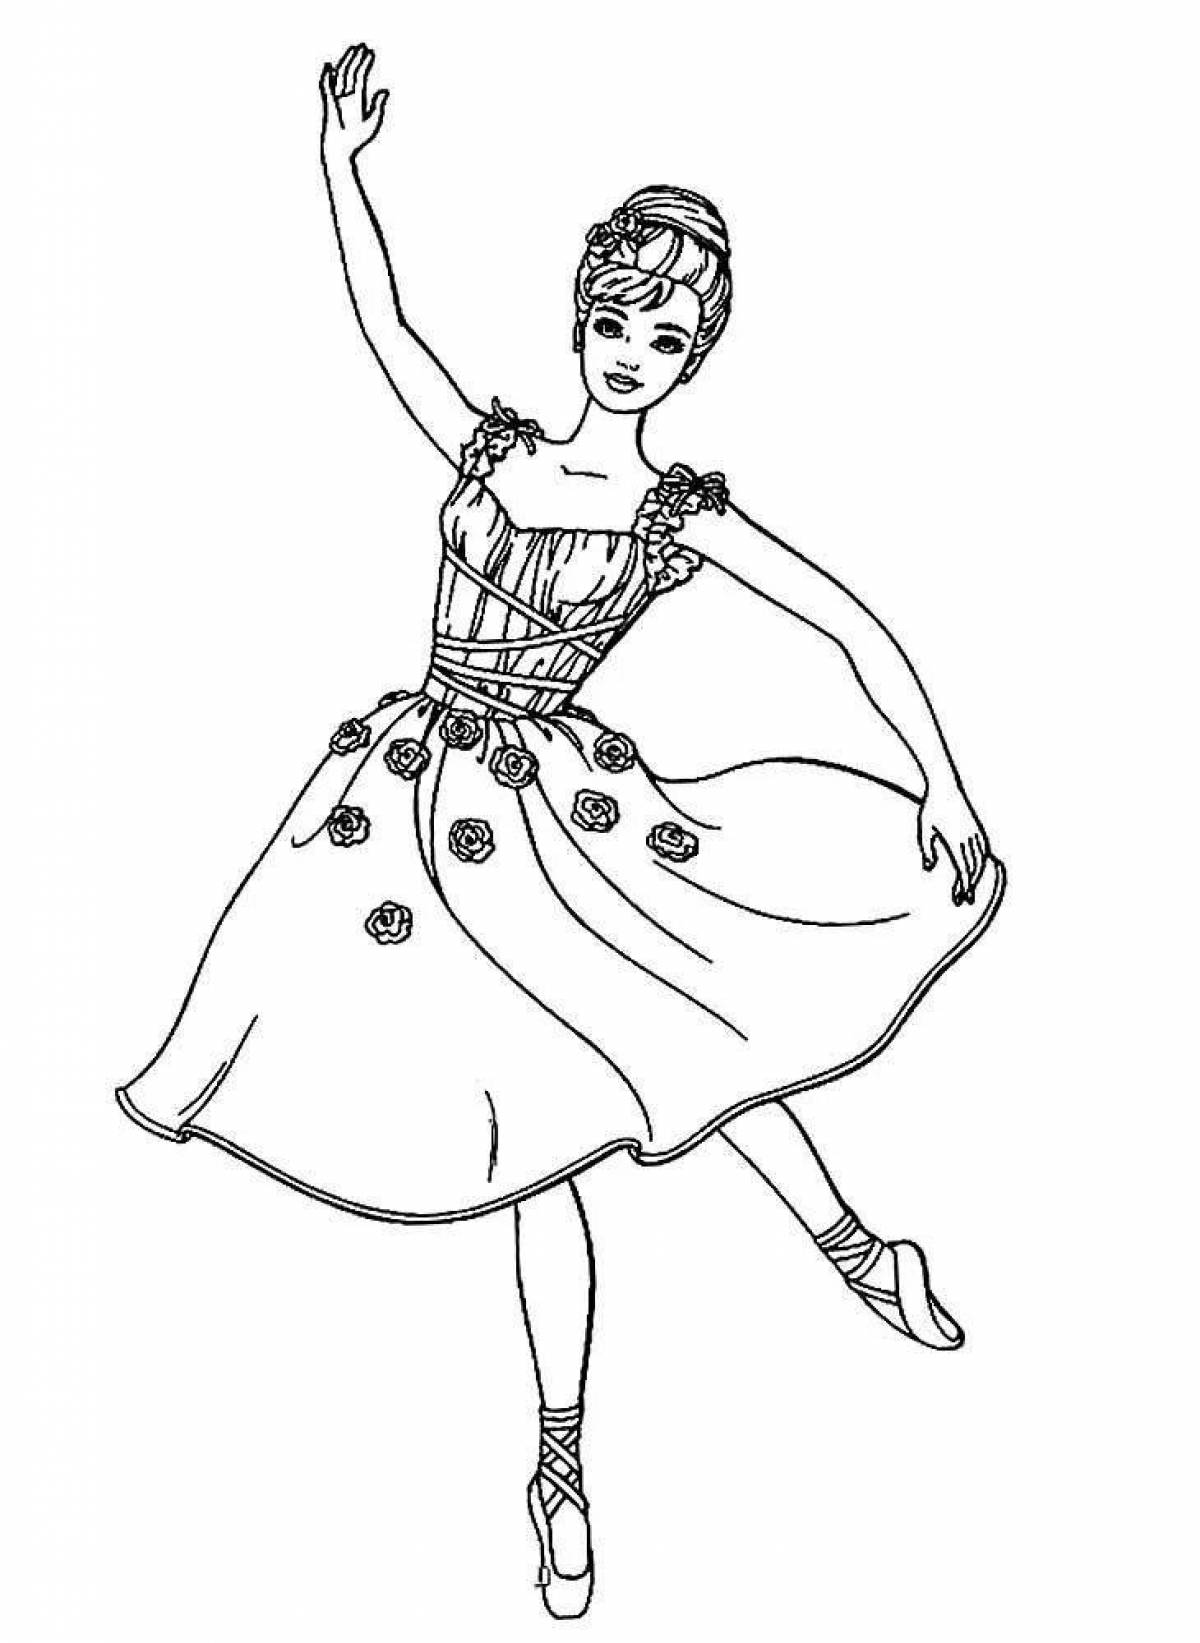 Bright ballerina coloring pages for girls